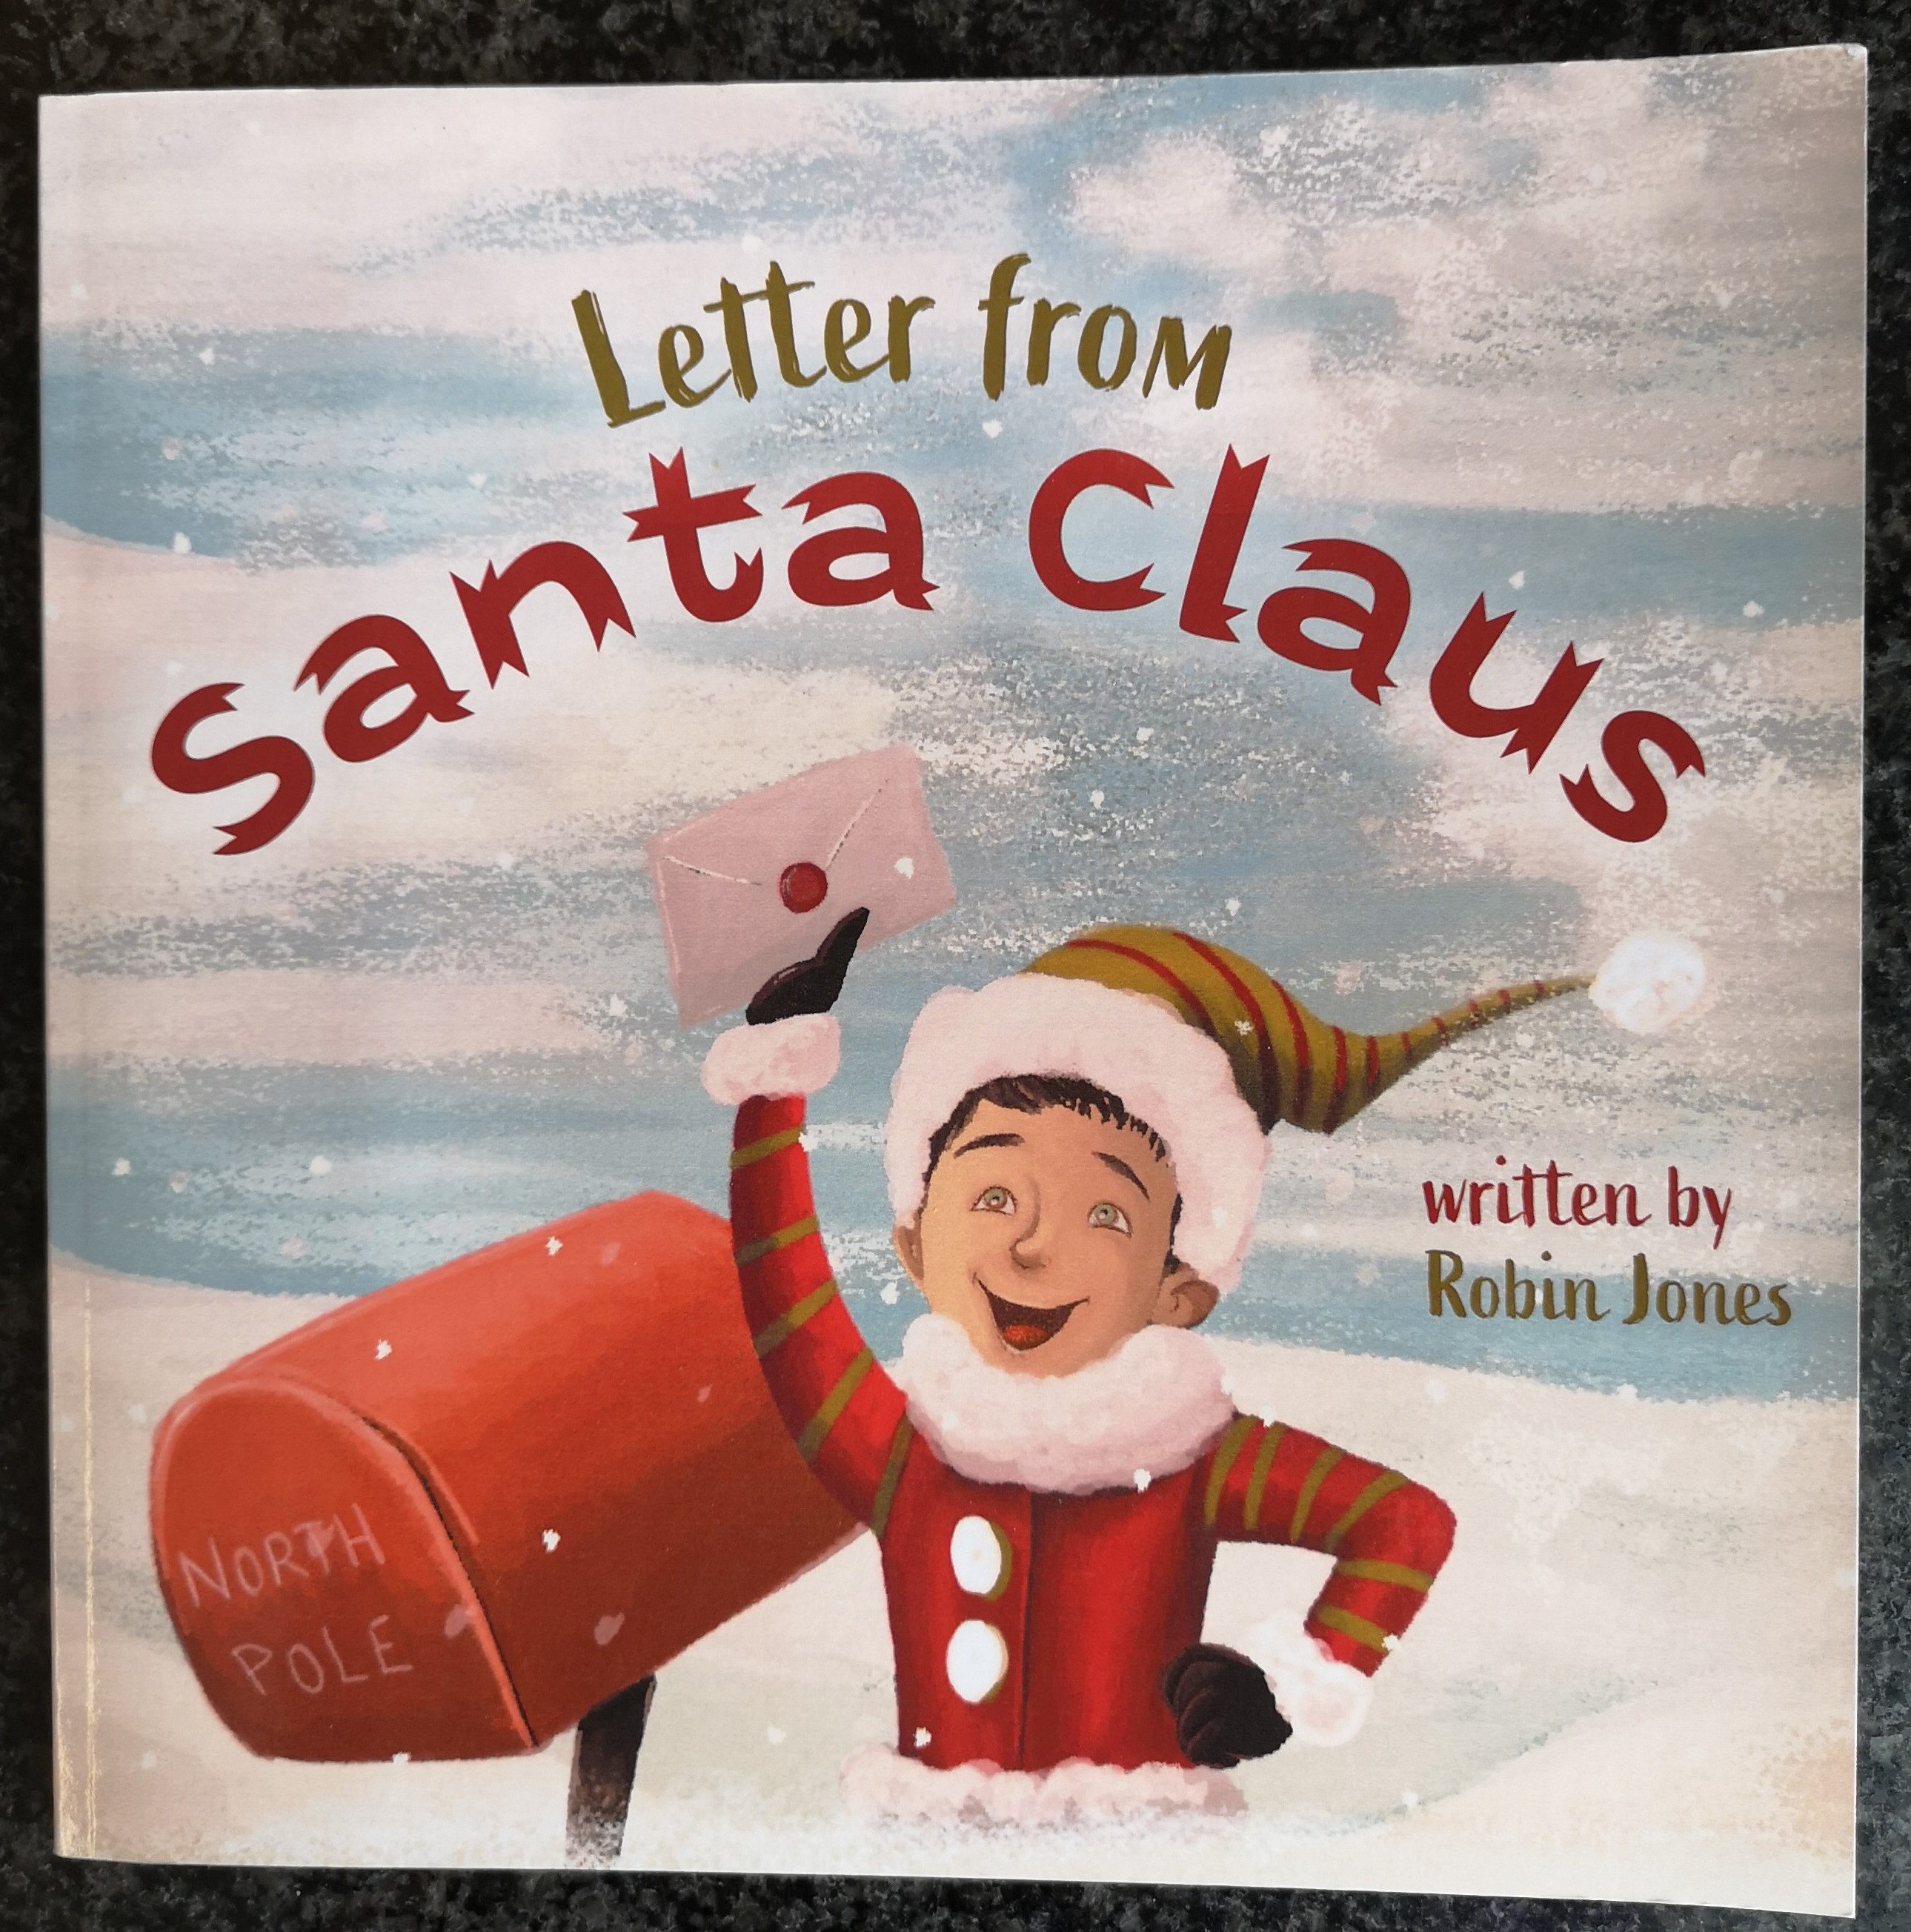 “Letter from Santa Claus” by Robin Jones